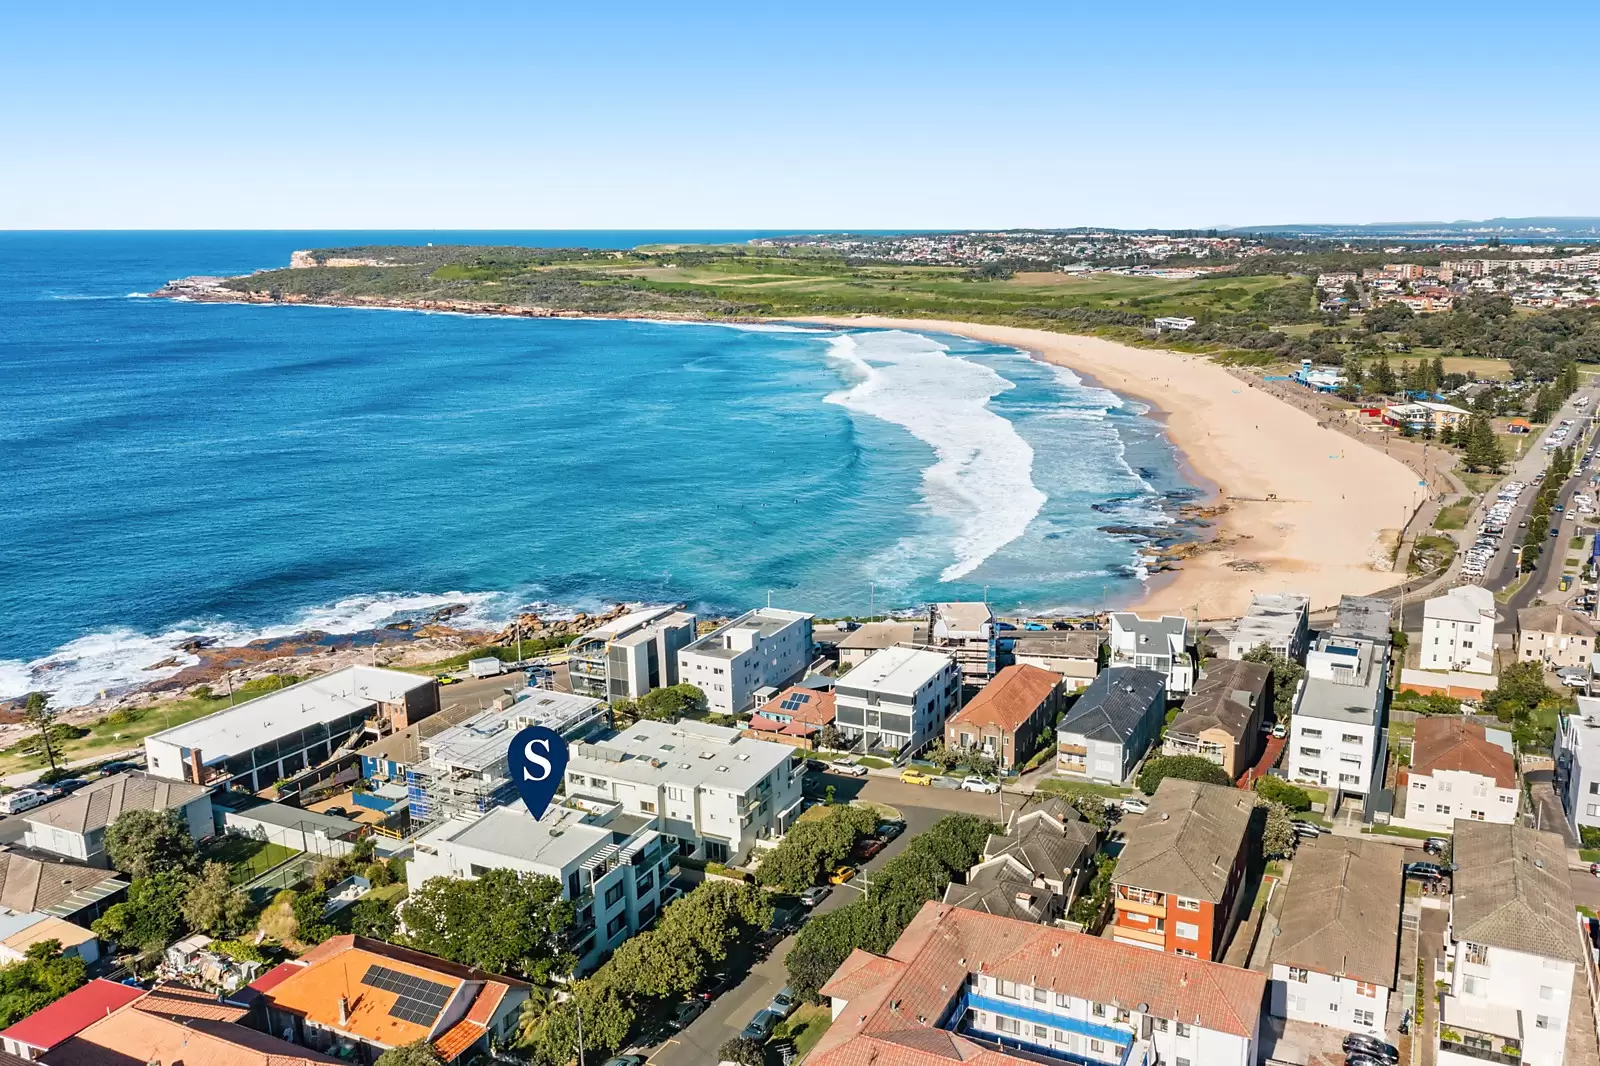 Photo #3: 9/9-11 Beaumond Avenue, Maroubra - Sold by Sydney Sotheby's International Realty